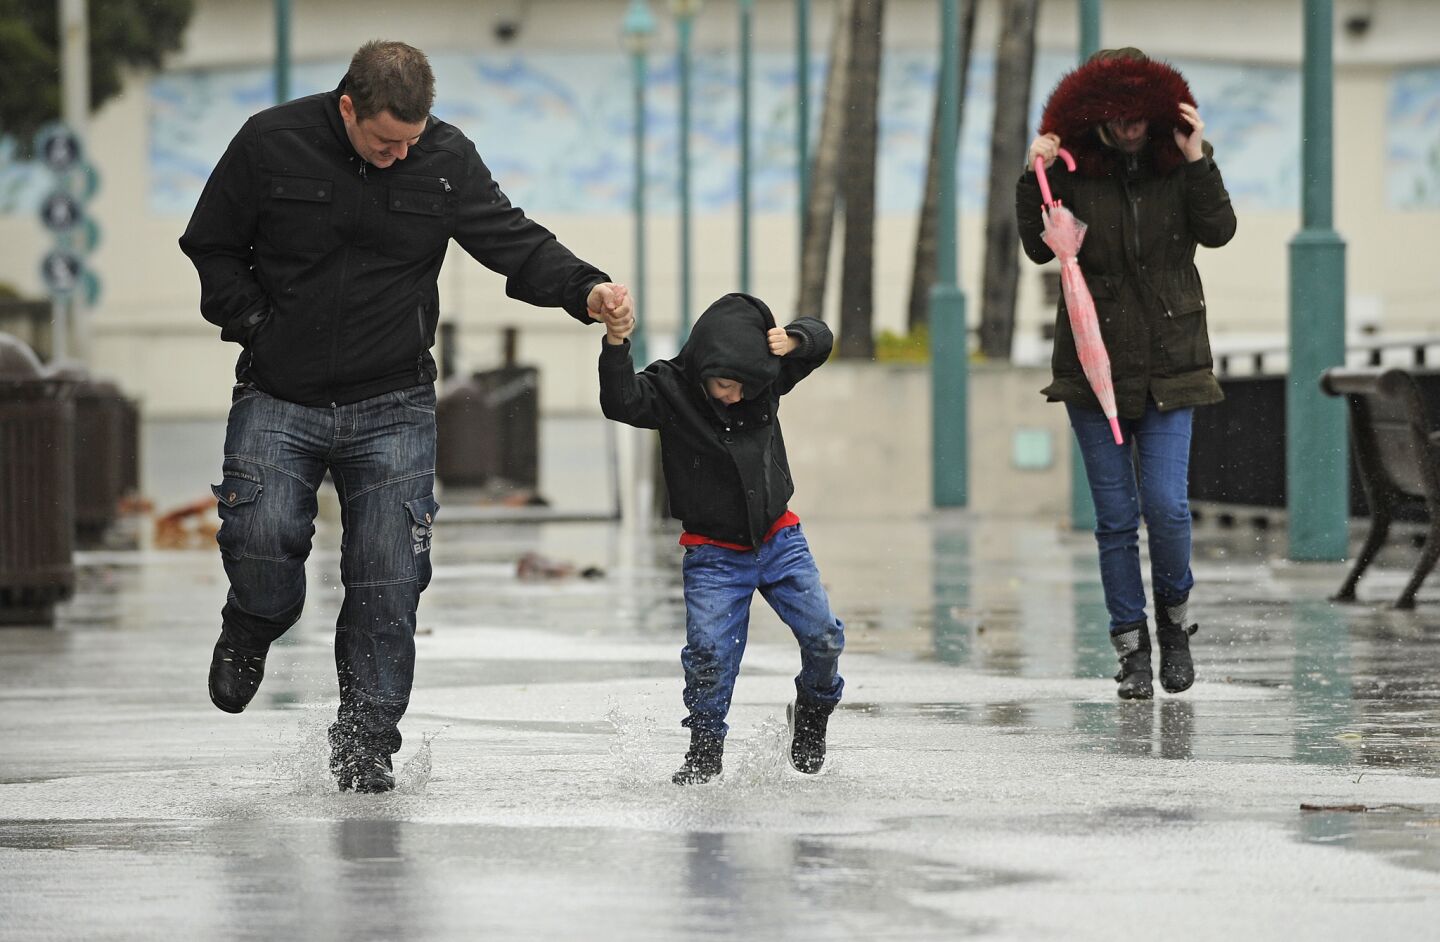 Scott Hesford-Hensler, left, plays in the rain with his son Jayden, 5, and wife Danielle, right, at King Harbour in Redondo Beach.